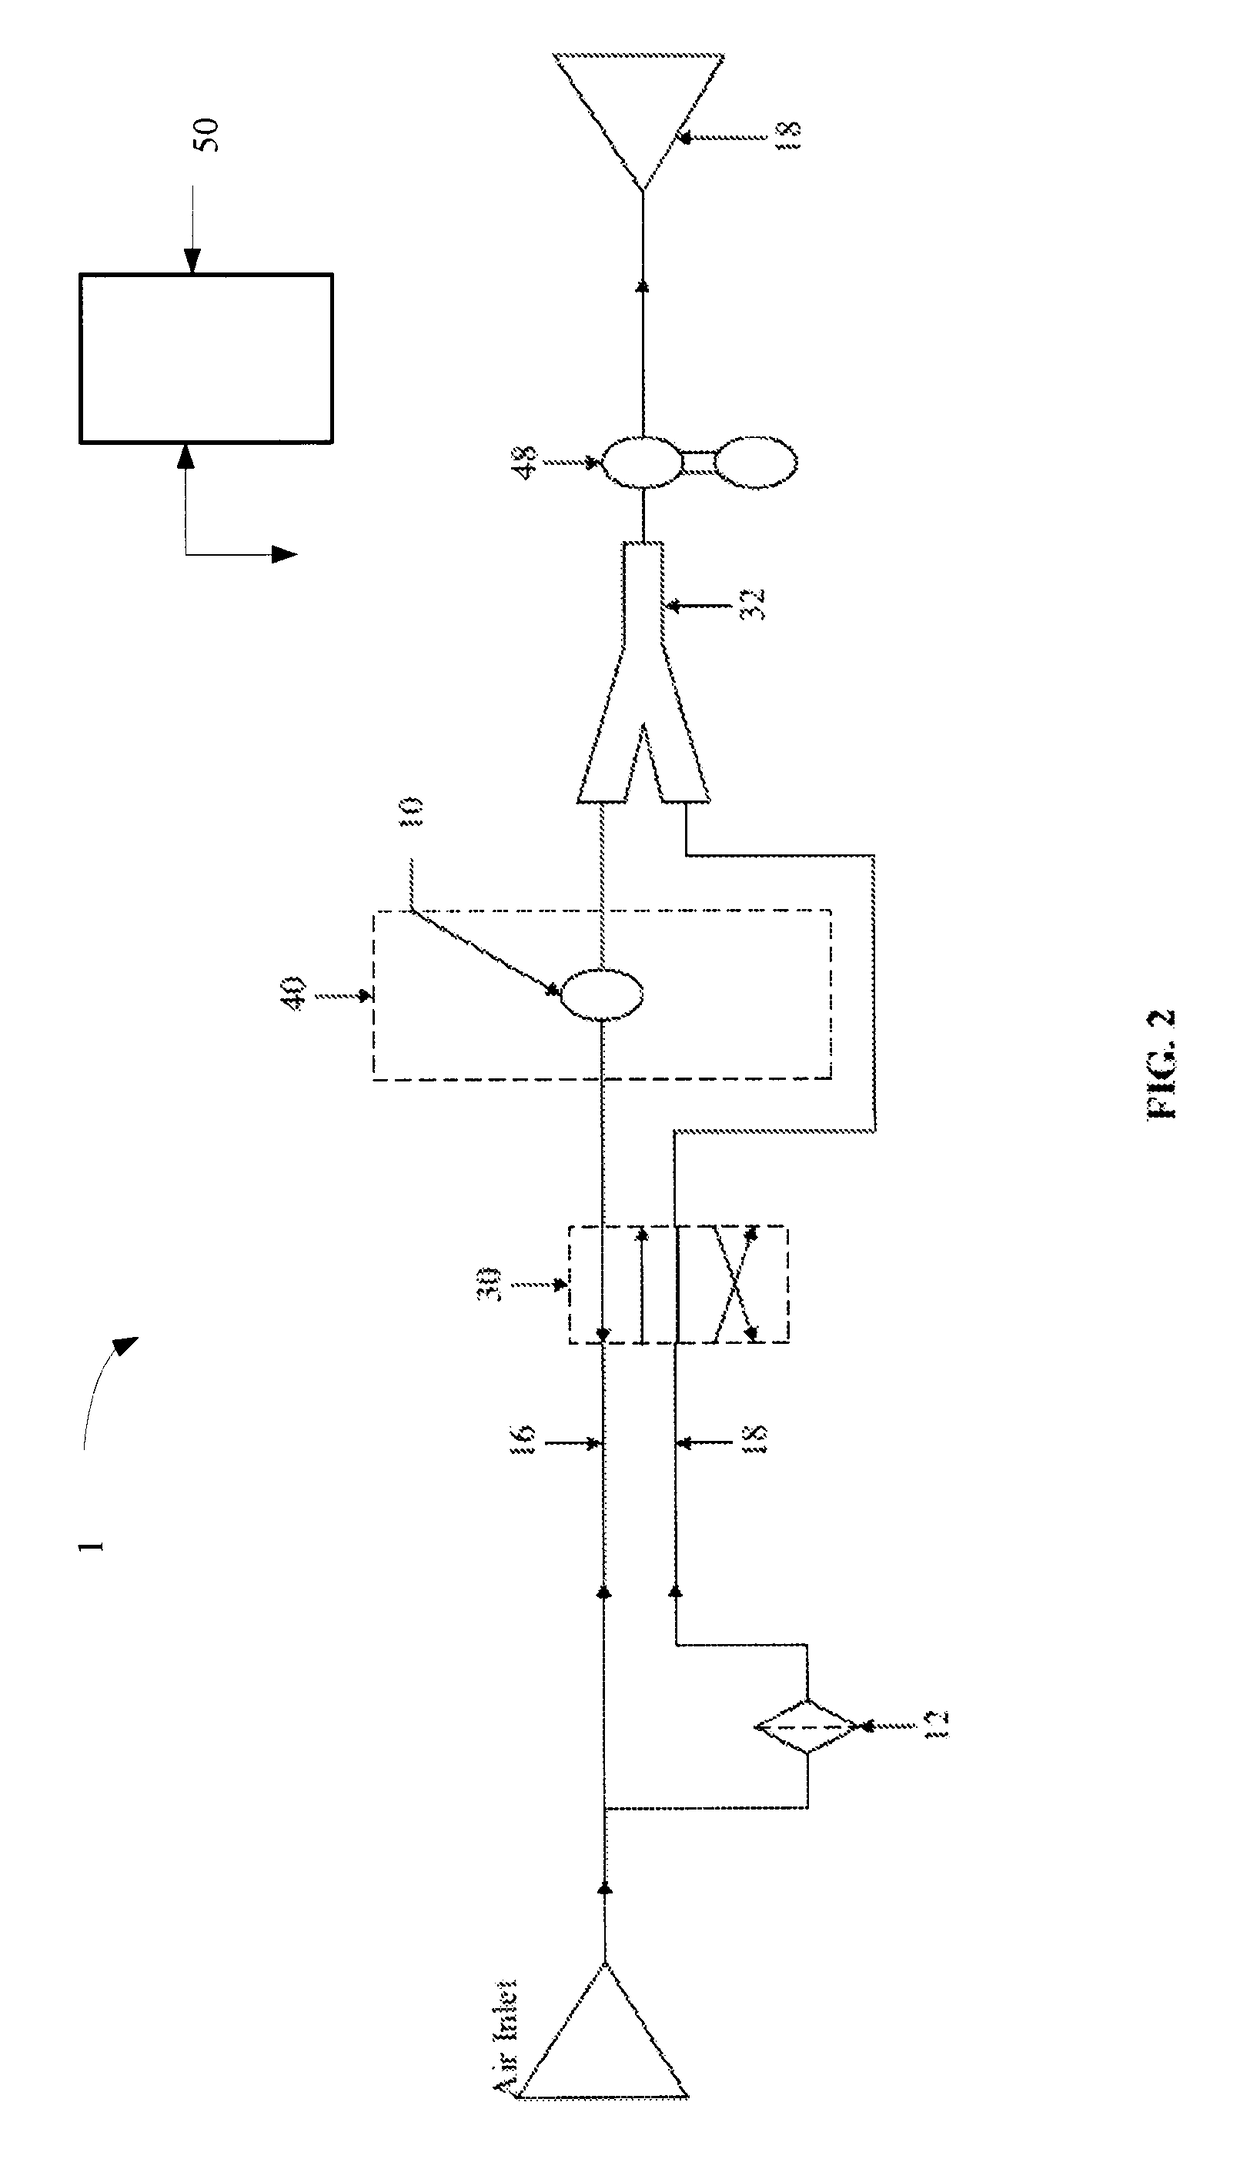 Auto-cleaning and auto-zeroing system used with a photo-ionization detector